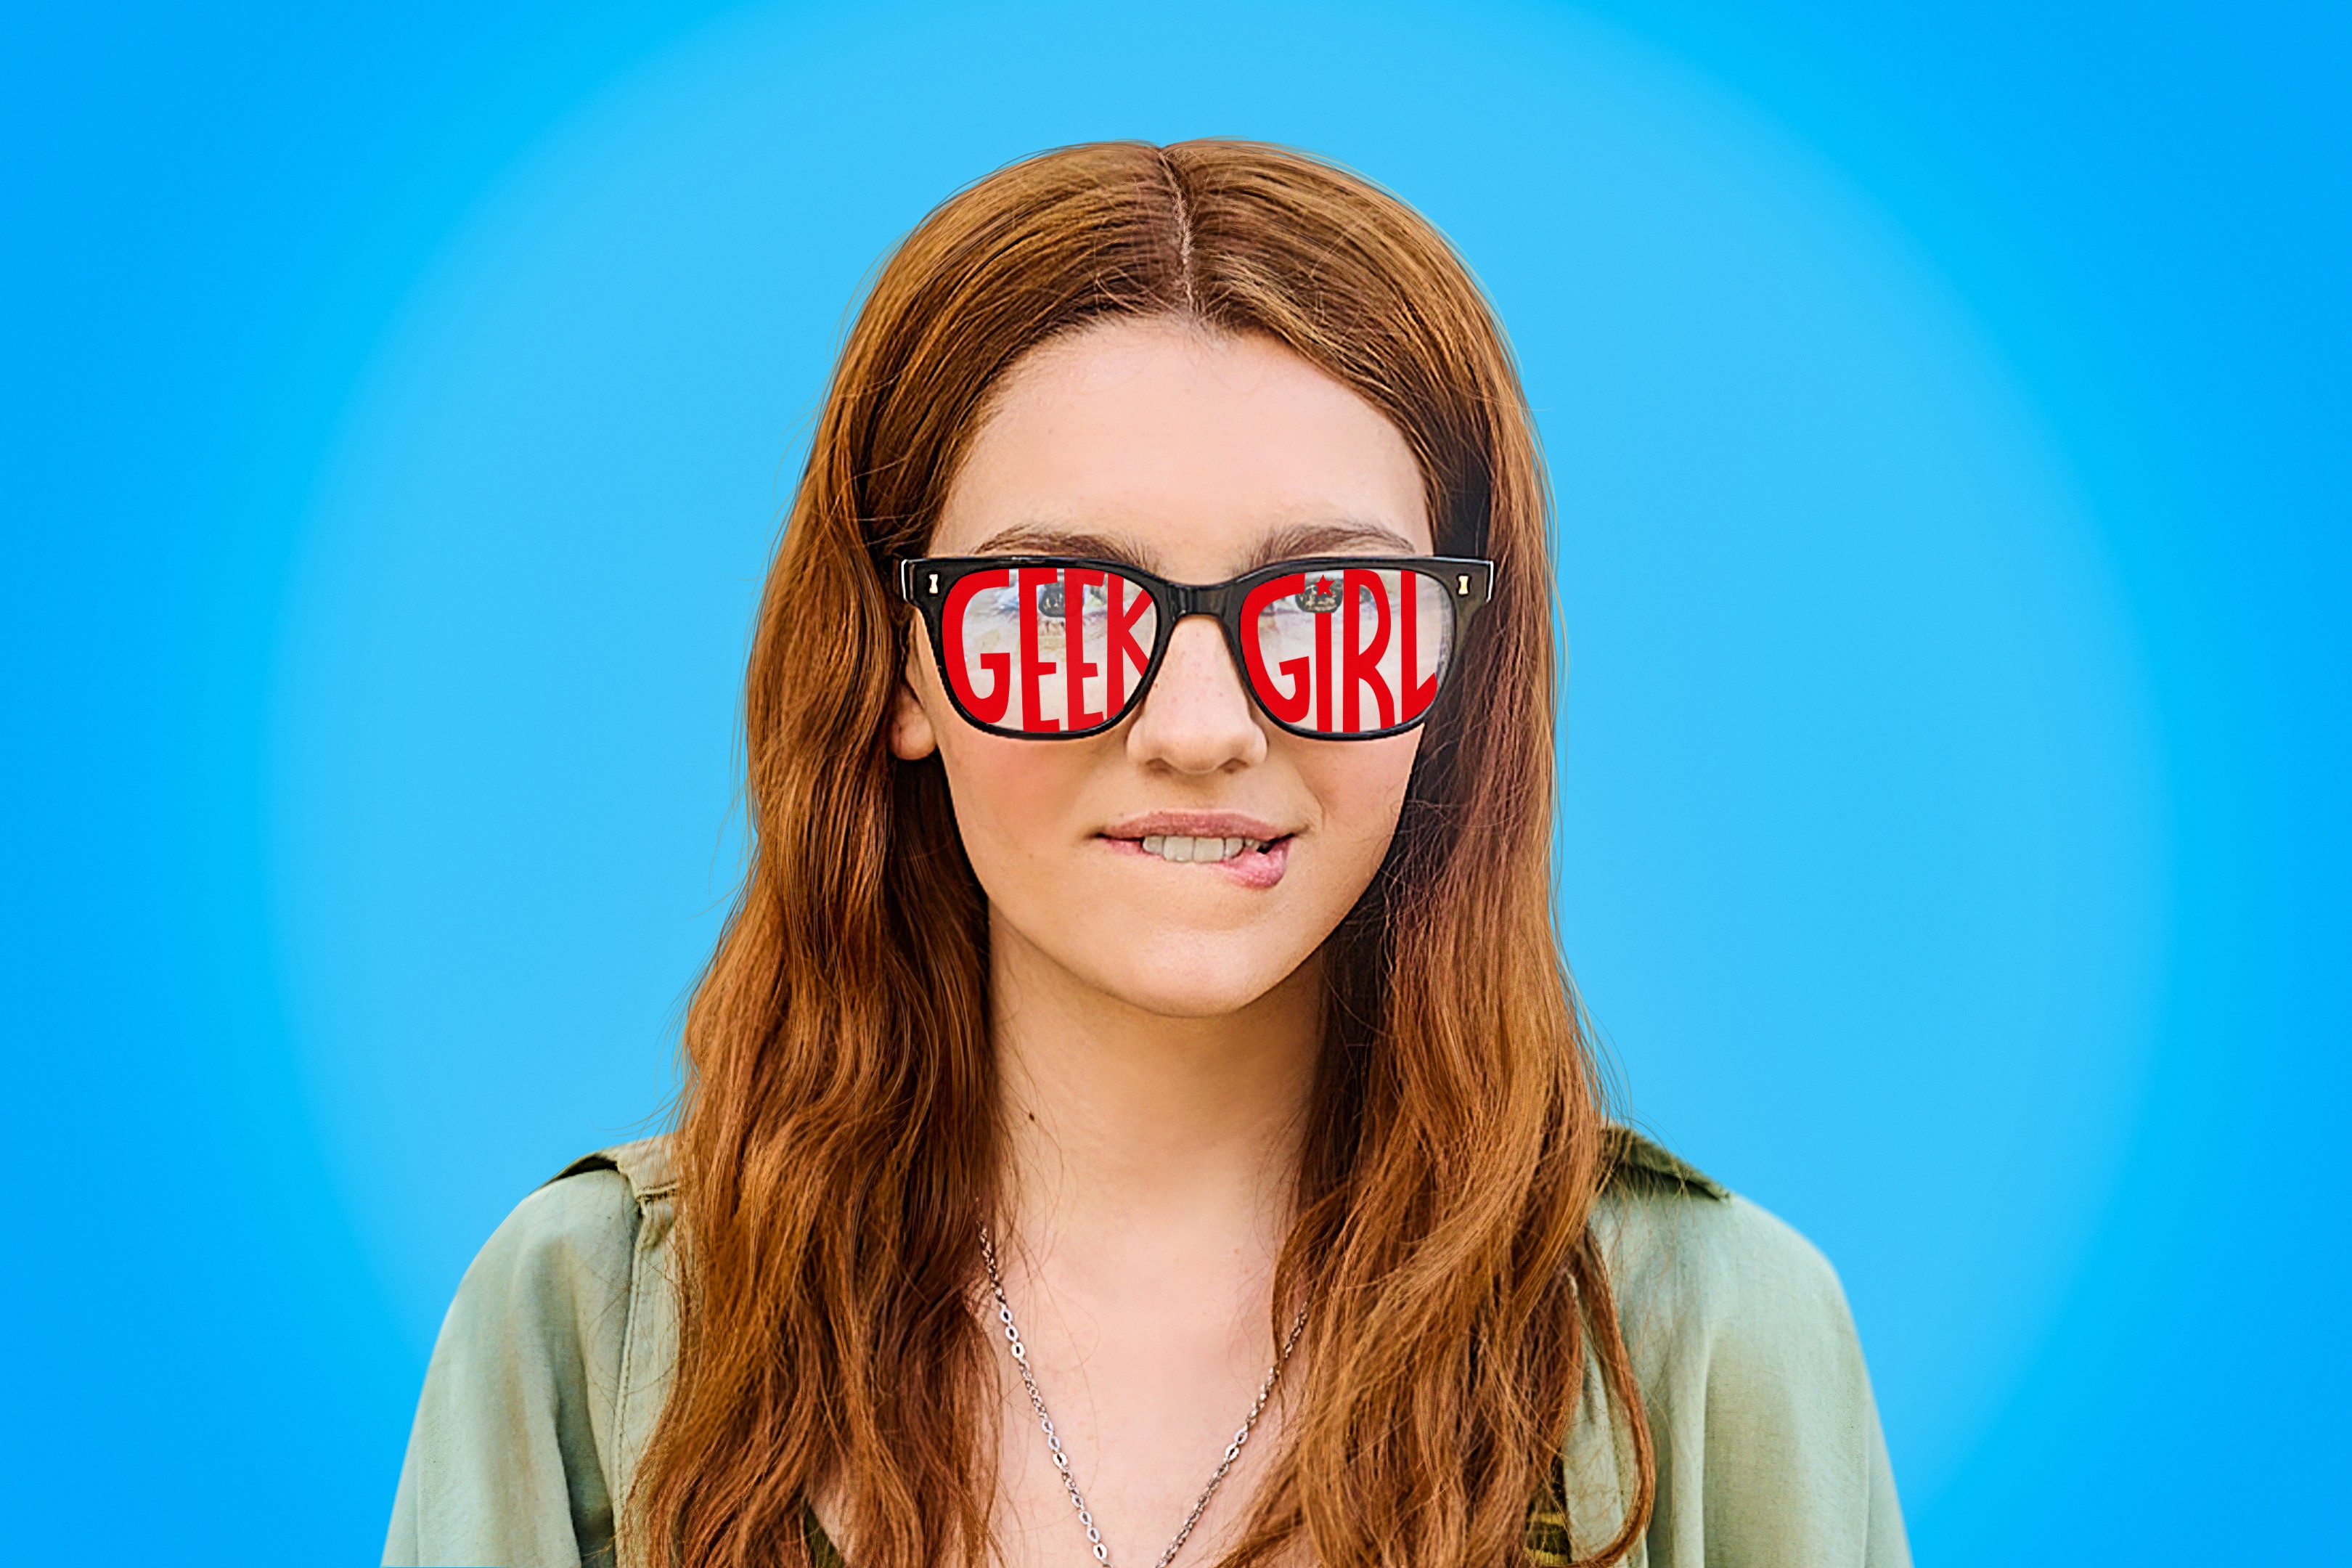 Emily Carey as Harriet Manners in Geek Girl. She is stood against a blue background and has sunglasses on which say the title, Geek Girl